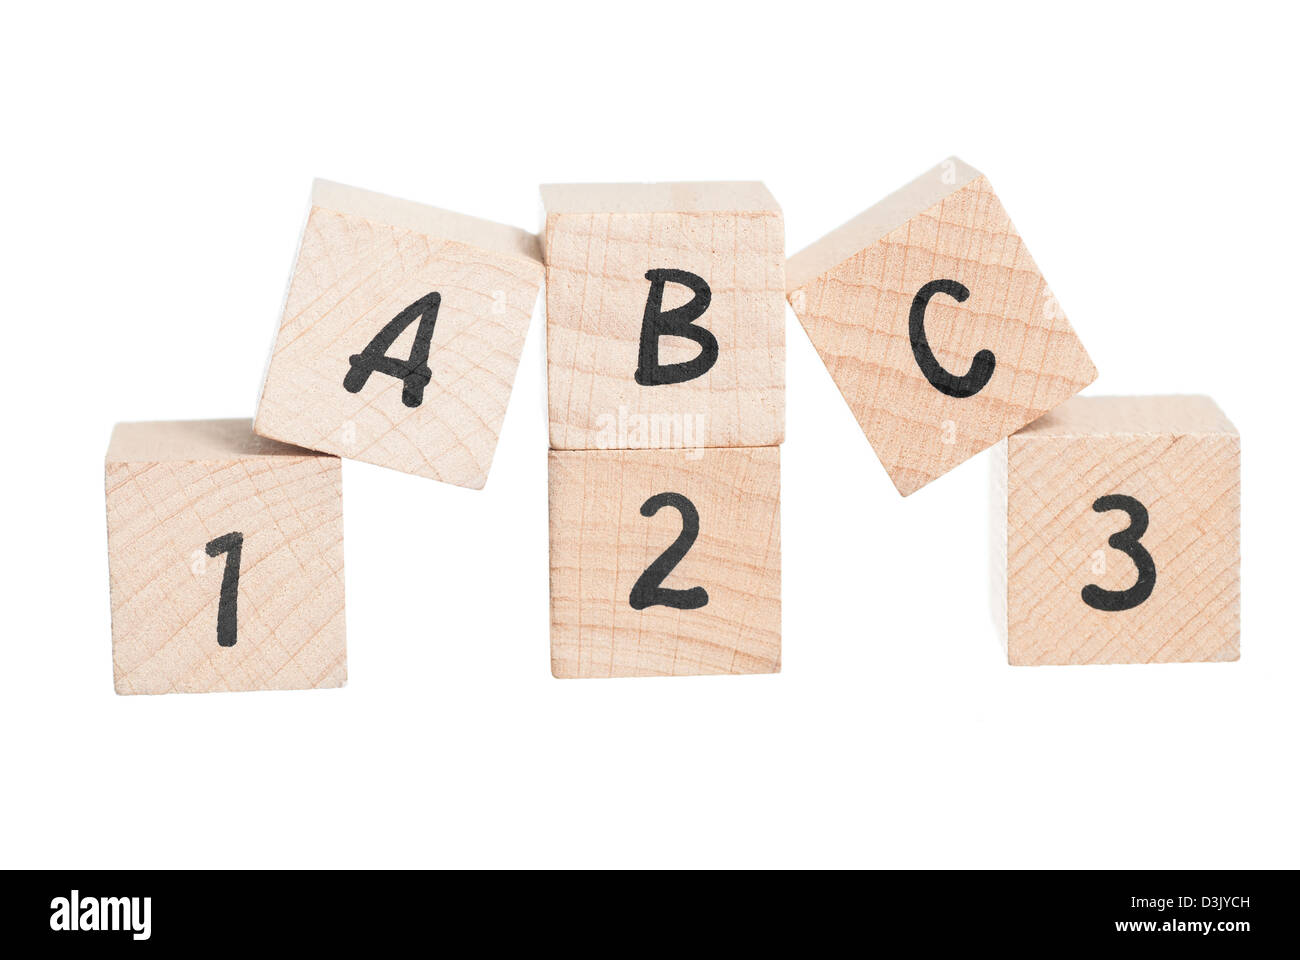 Dipiction of learning the abc's. White background. Stock Photo